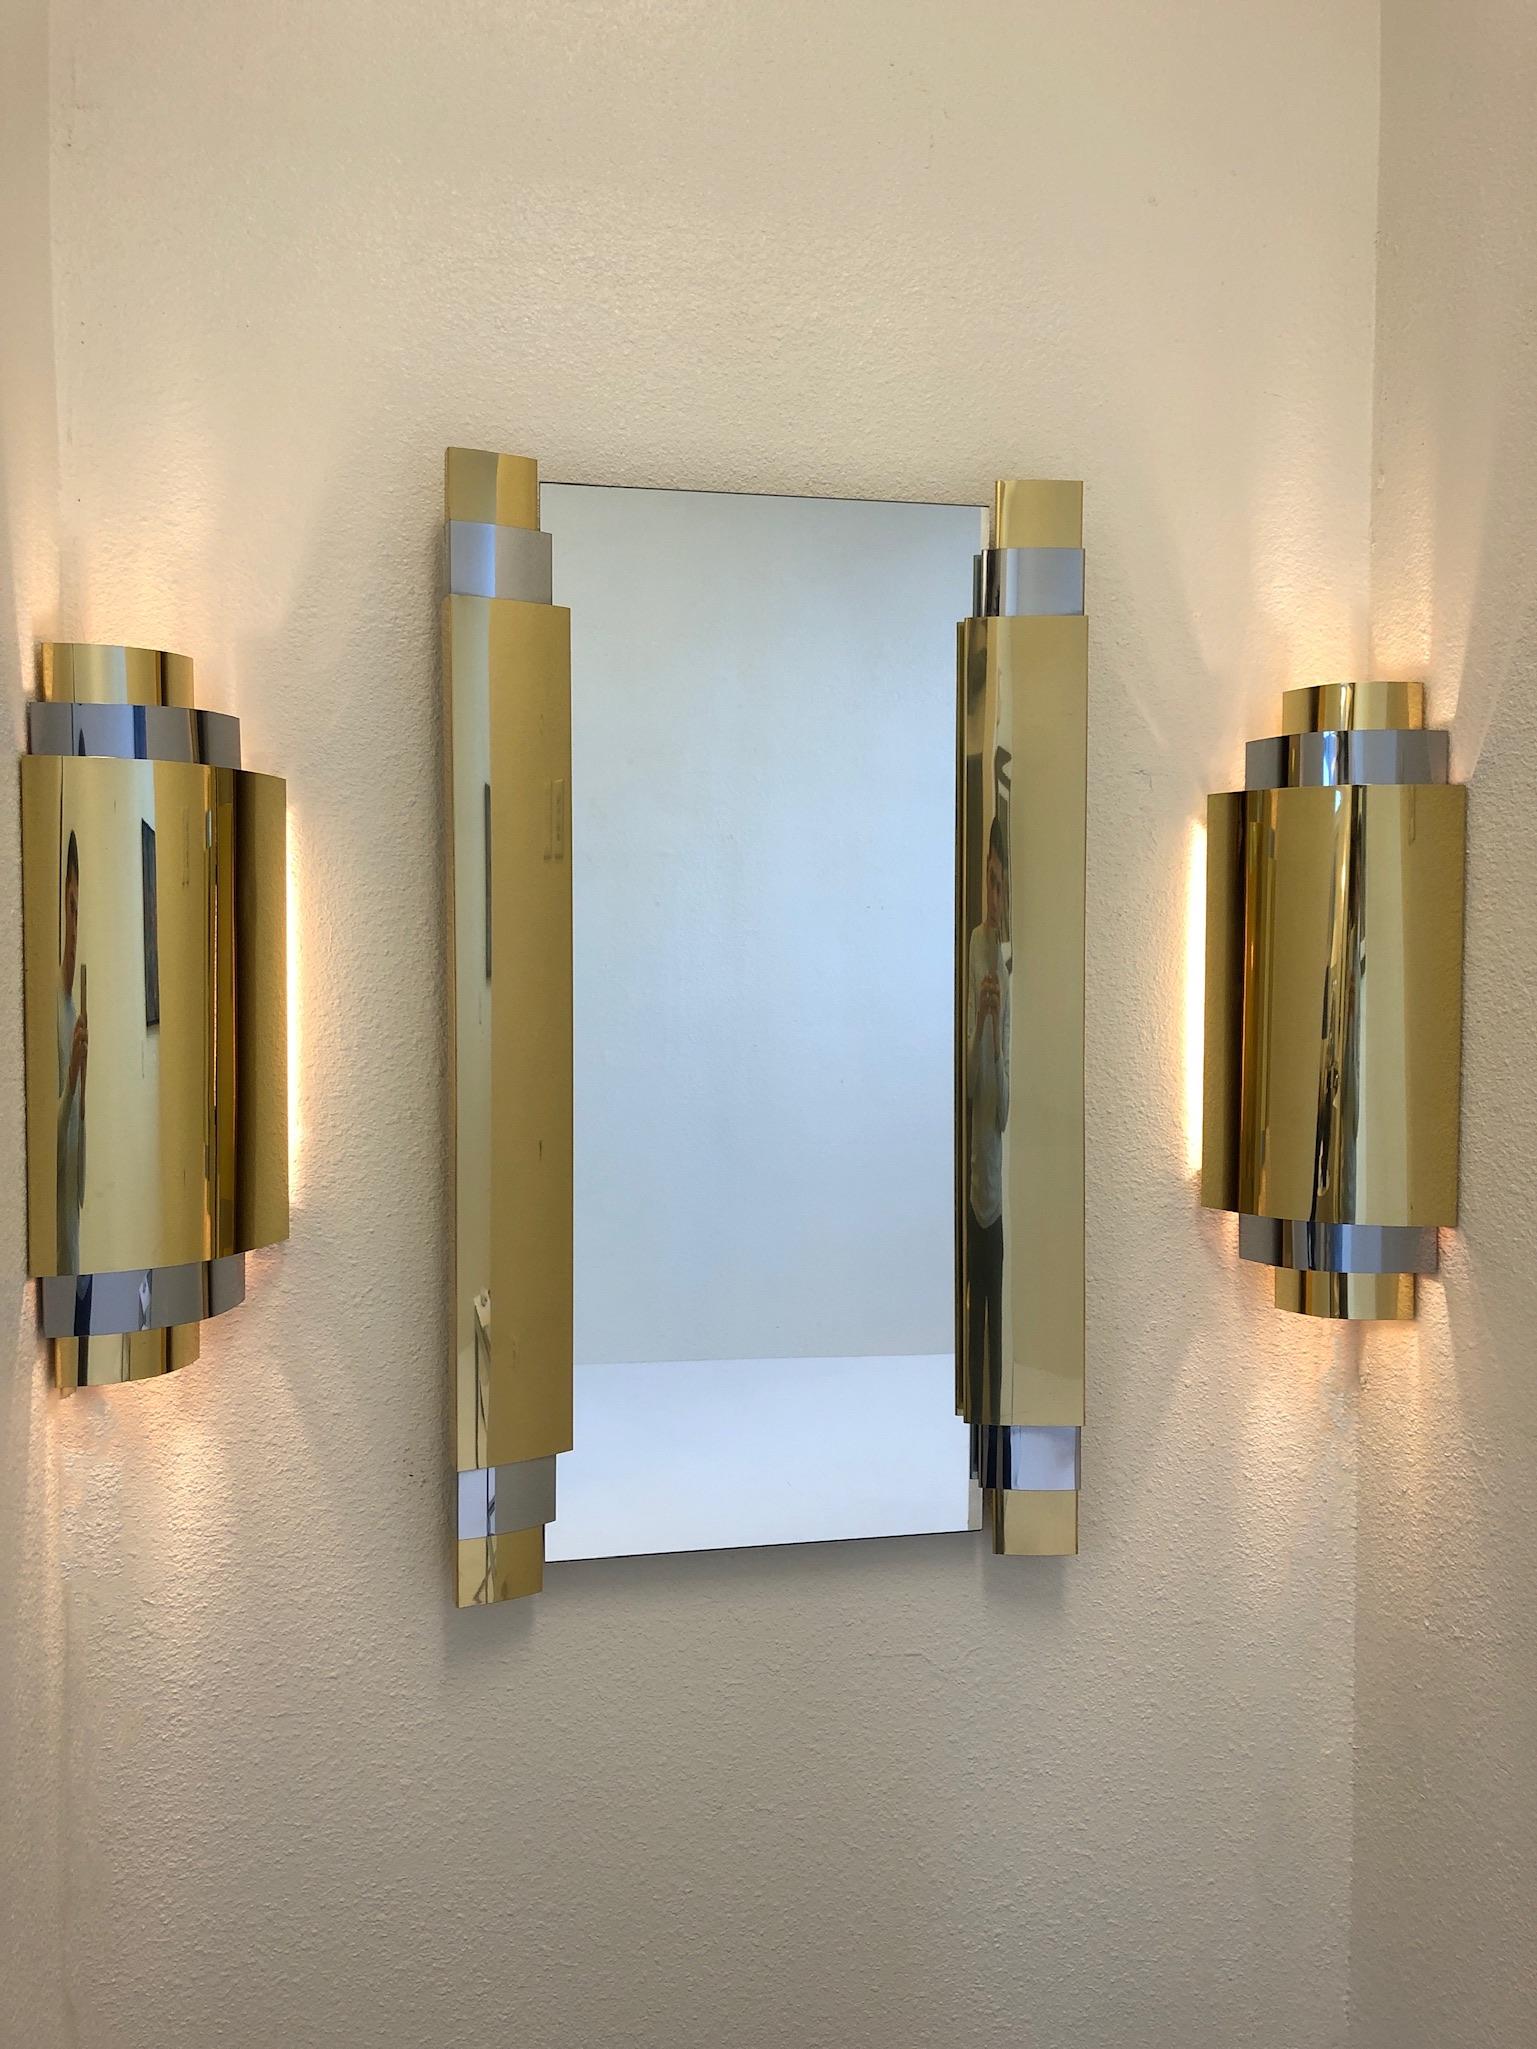 A spectacular set of corner wall sconces and wall mirror design in the 1980s by Curtis Jere. The wall sconces were designed for a corner as shown on photos. They can be wires direct or with a plug-in cord as shown on the last photo. This are in